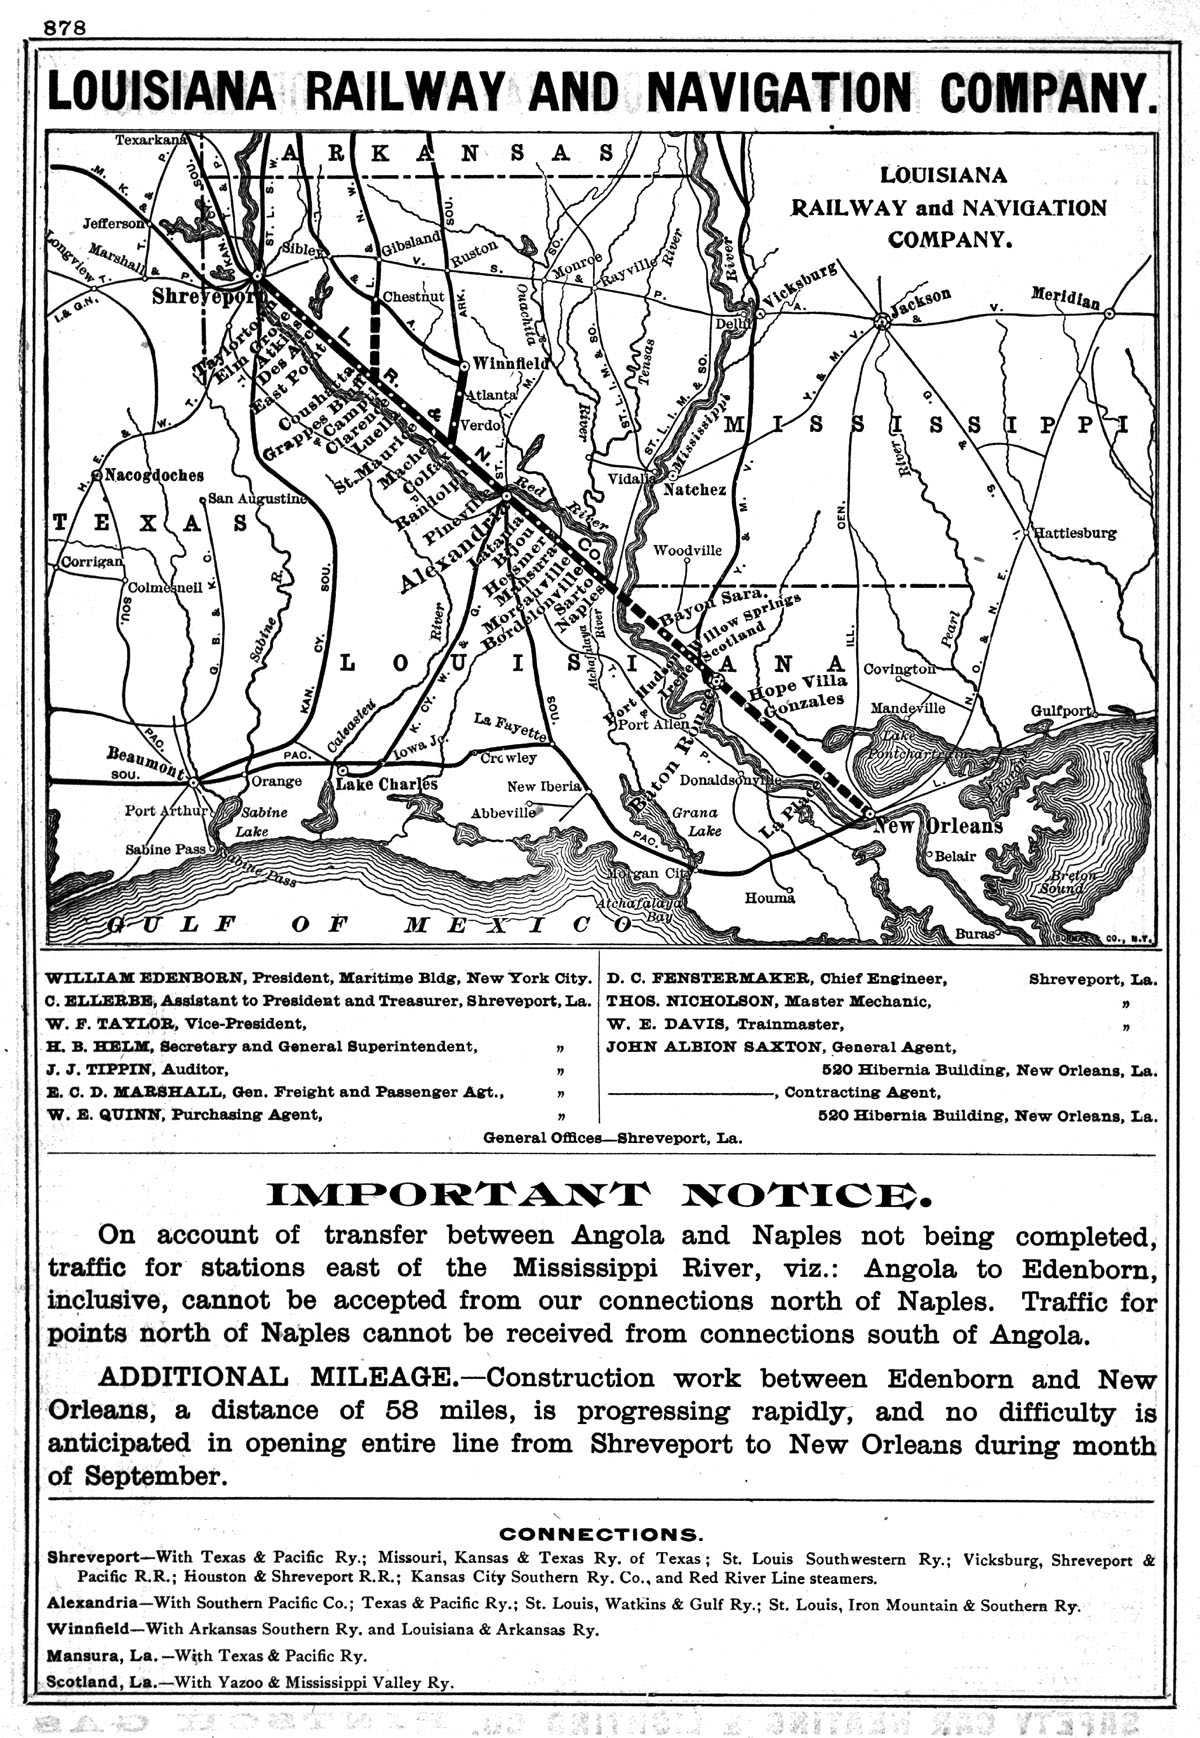 Louisiana Railway & Navigation Company, Public Timetable and Map Showing Route in 1906.